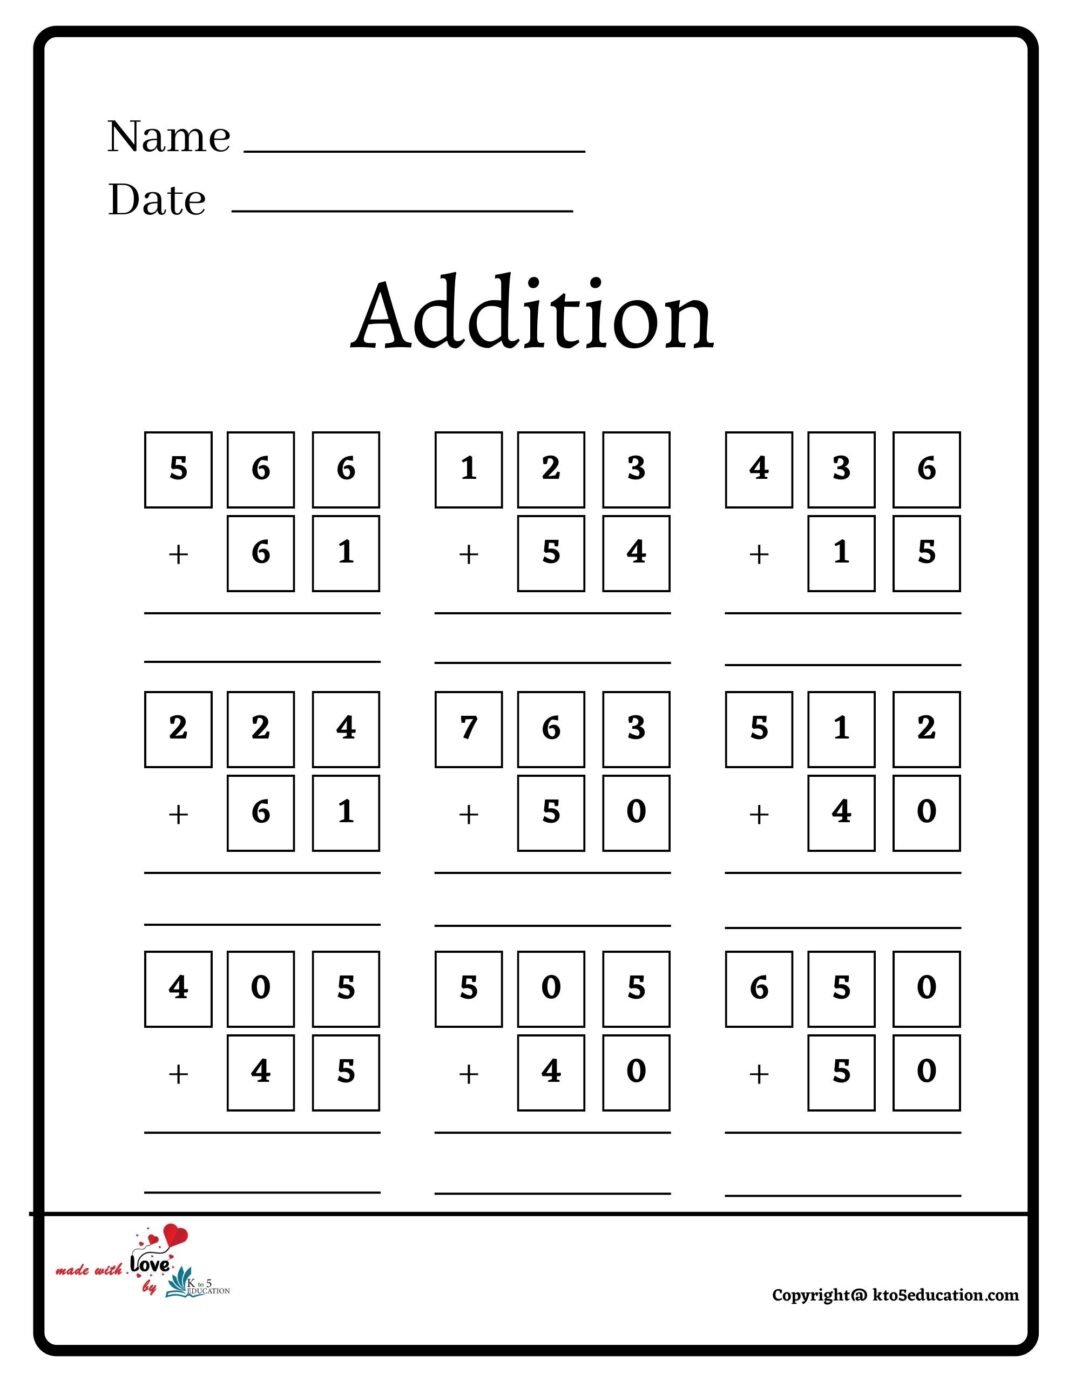 Addition Worksheet 3 Numbers